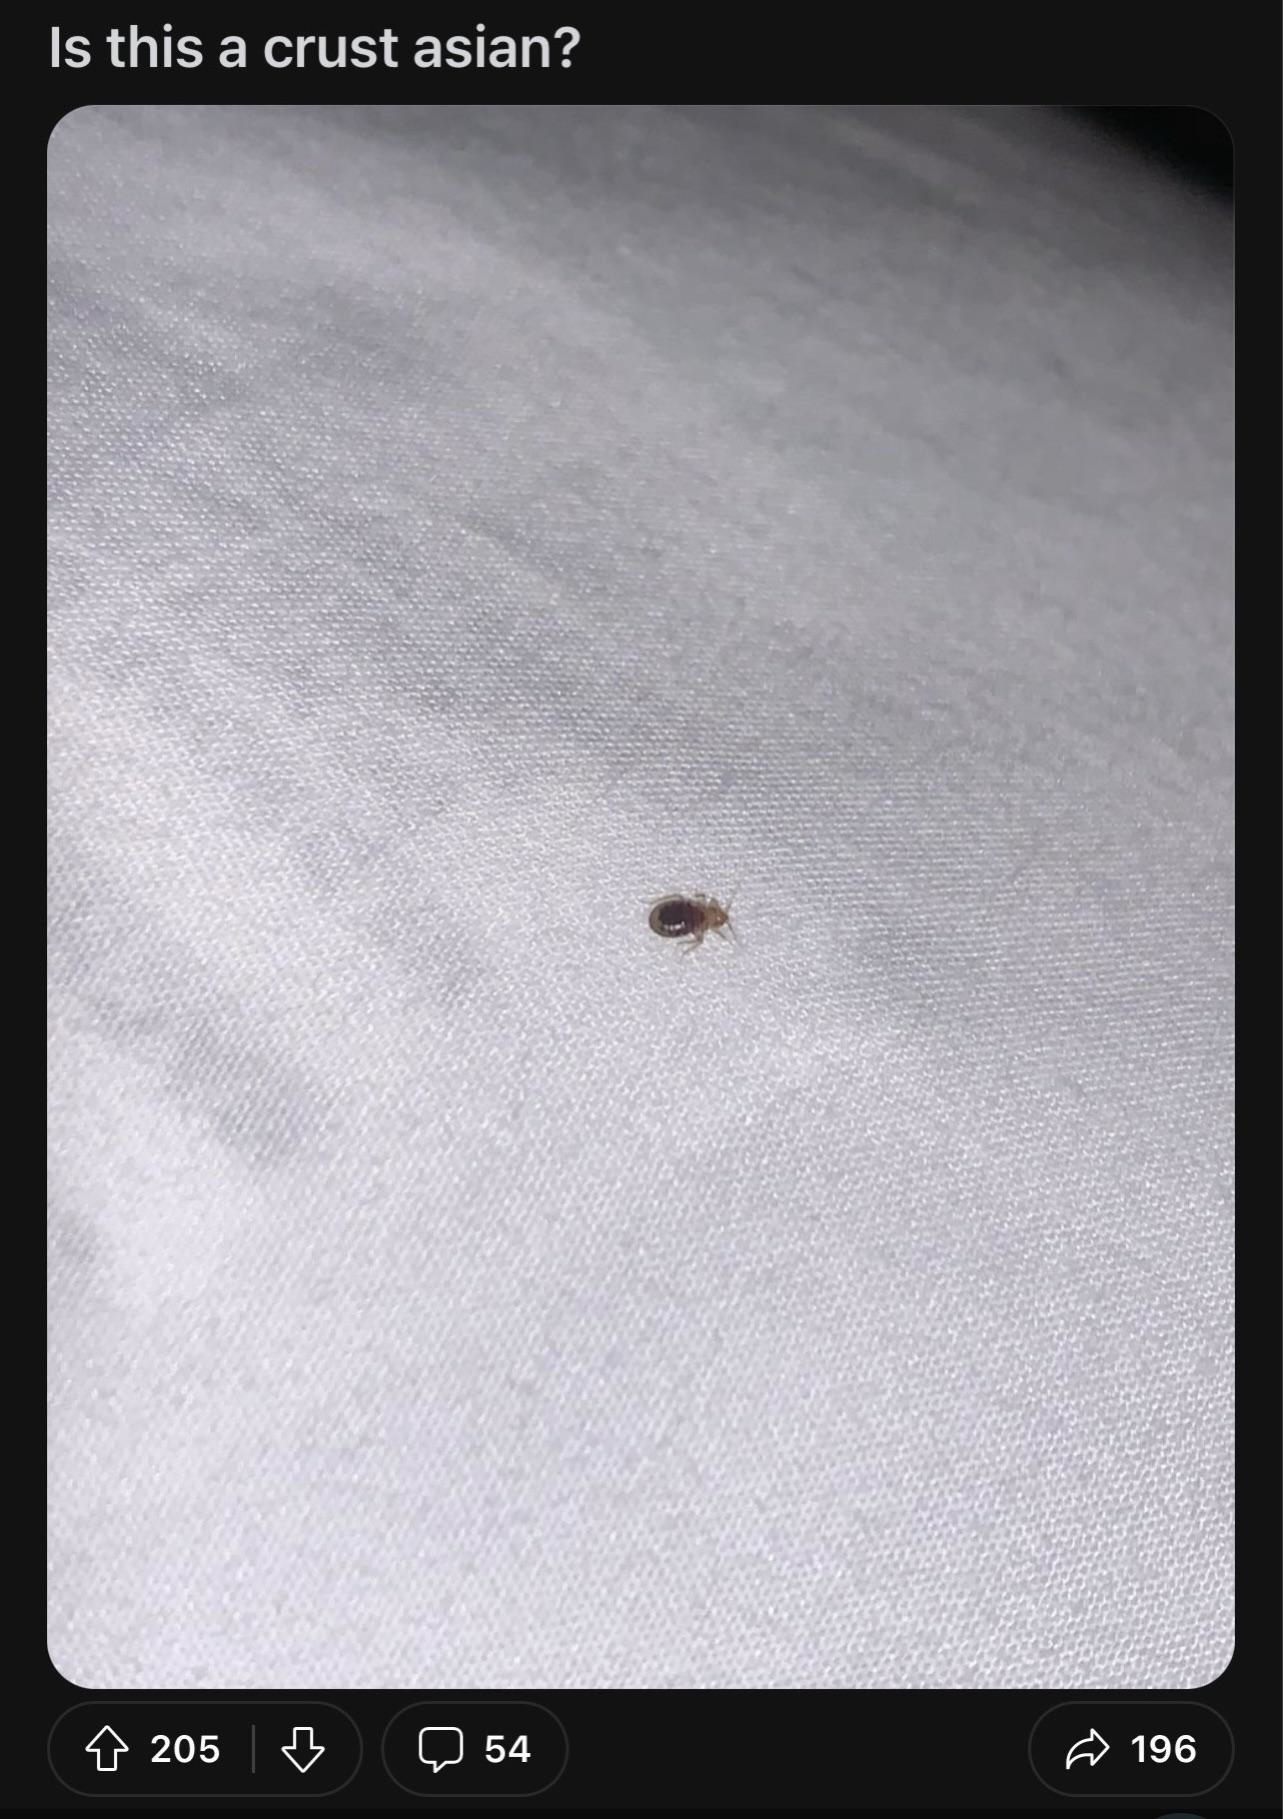 Photo of a small insect with text, &quot;Is that a crust asian?&quot;